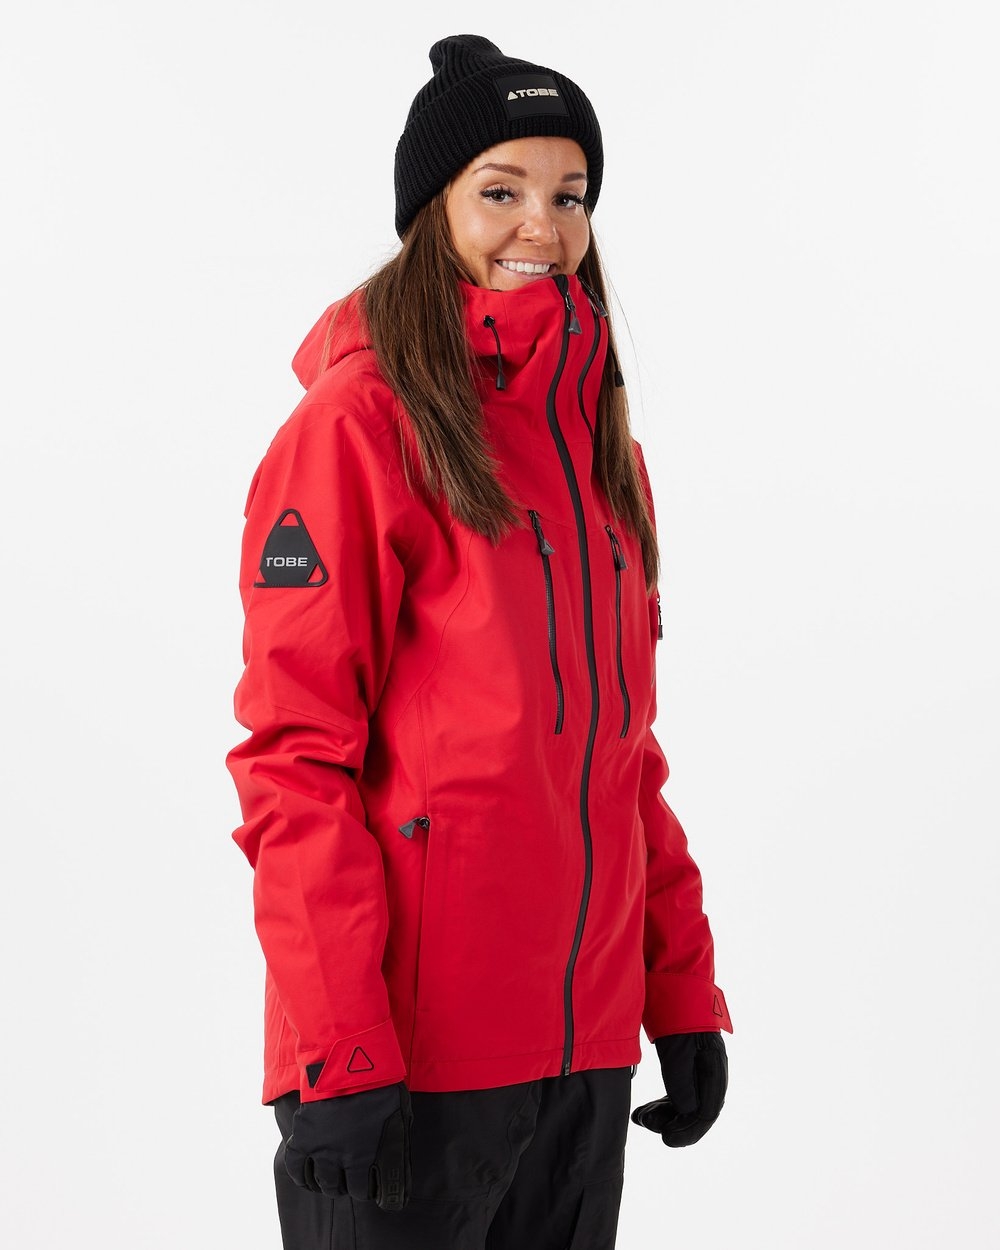 Macer Jacket - Red One